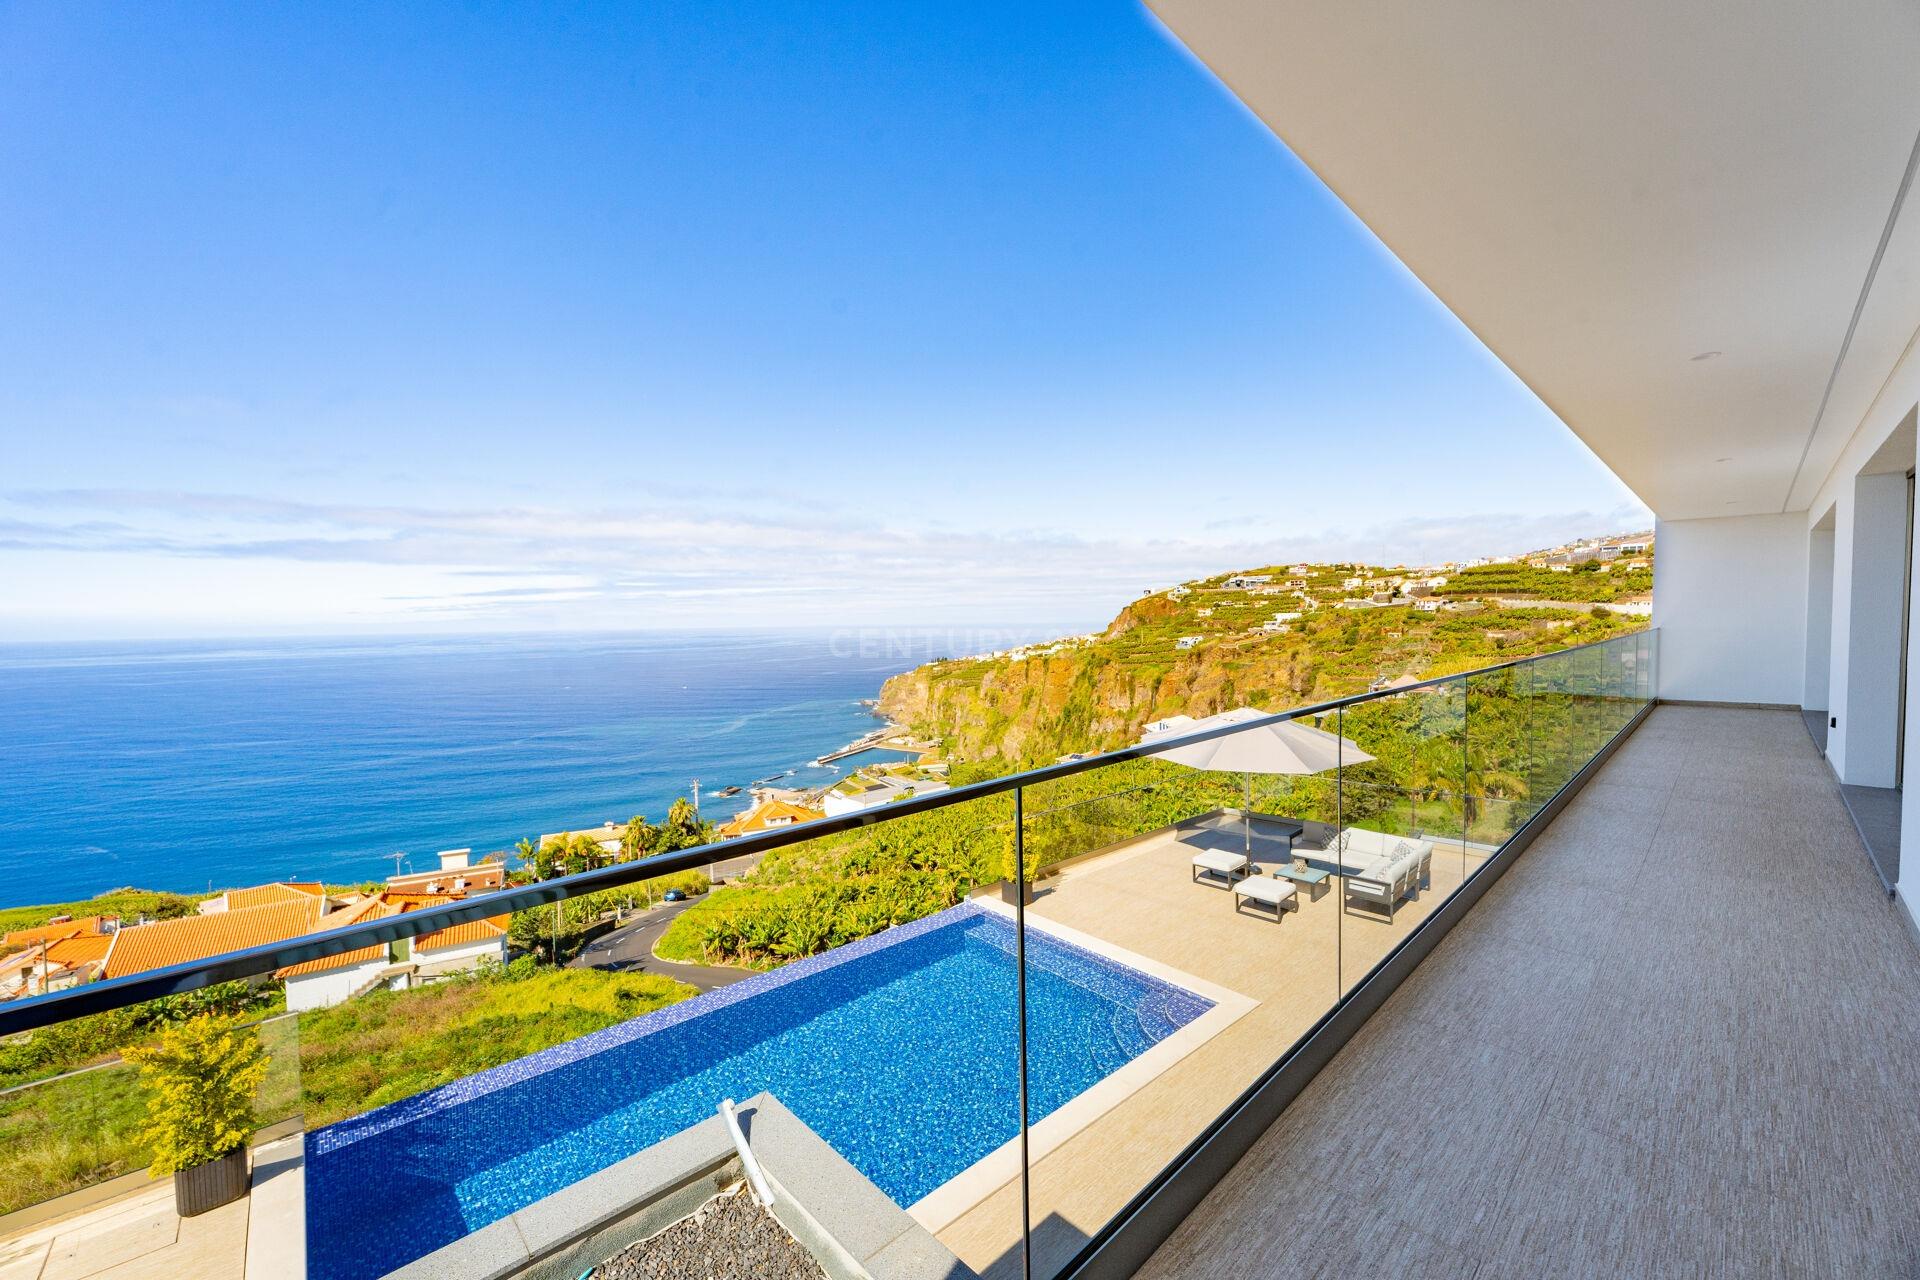 Luxurious 3+2 Bedroom Villa with Infinity Pool and Spectacular View - Ribeira Brava, Madeira